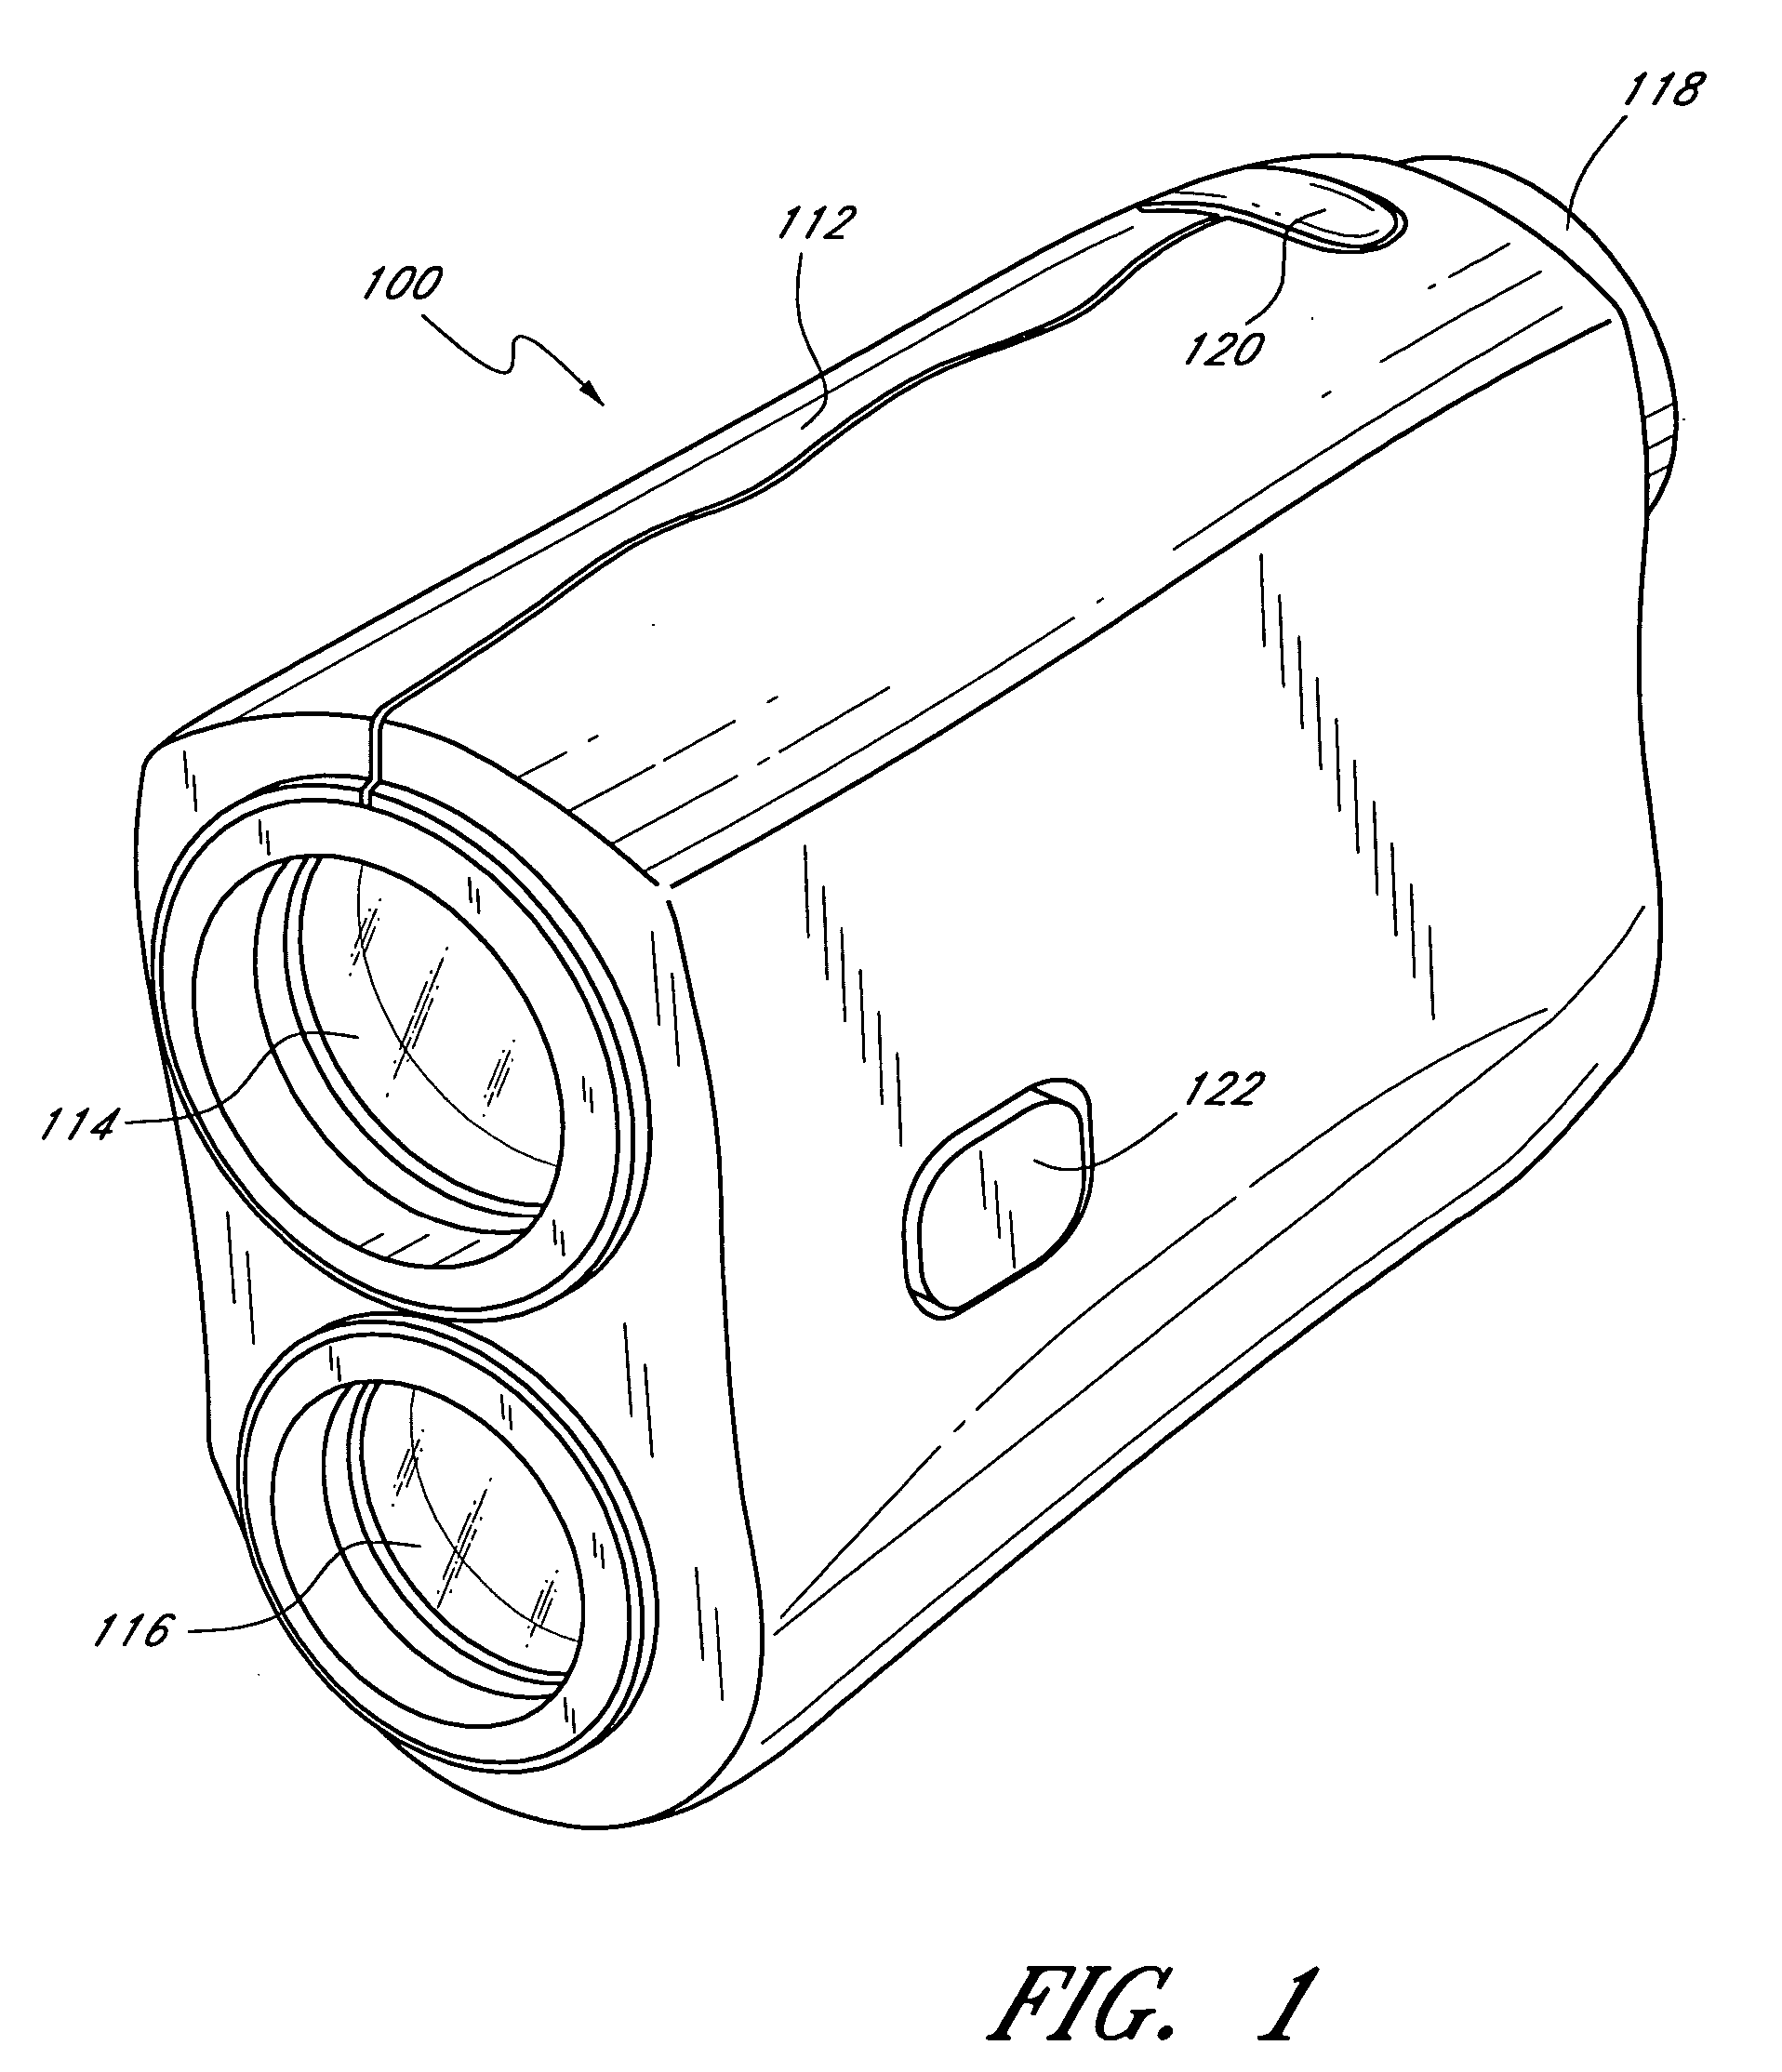 Rangefinder with reduced noise receiver